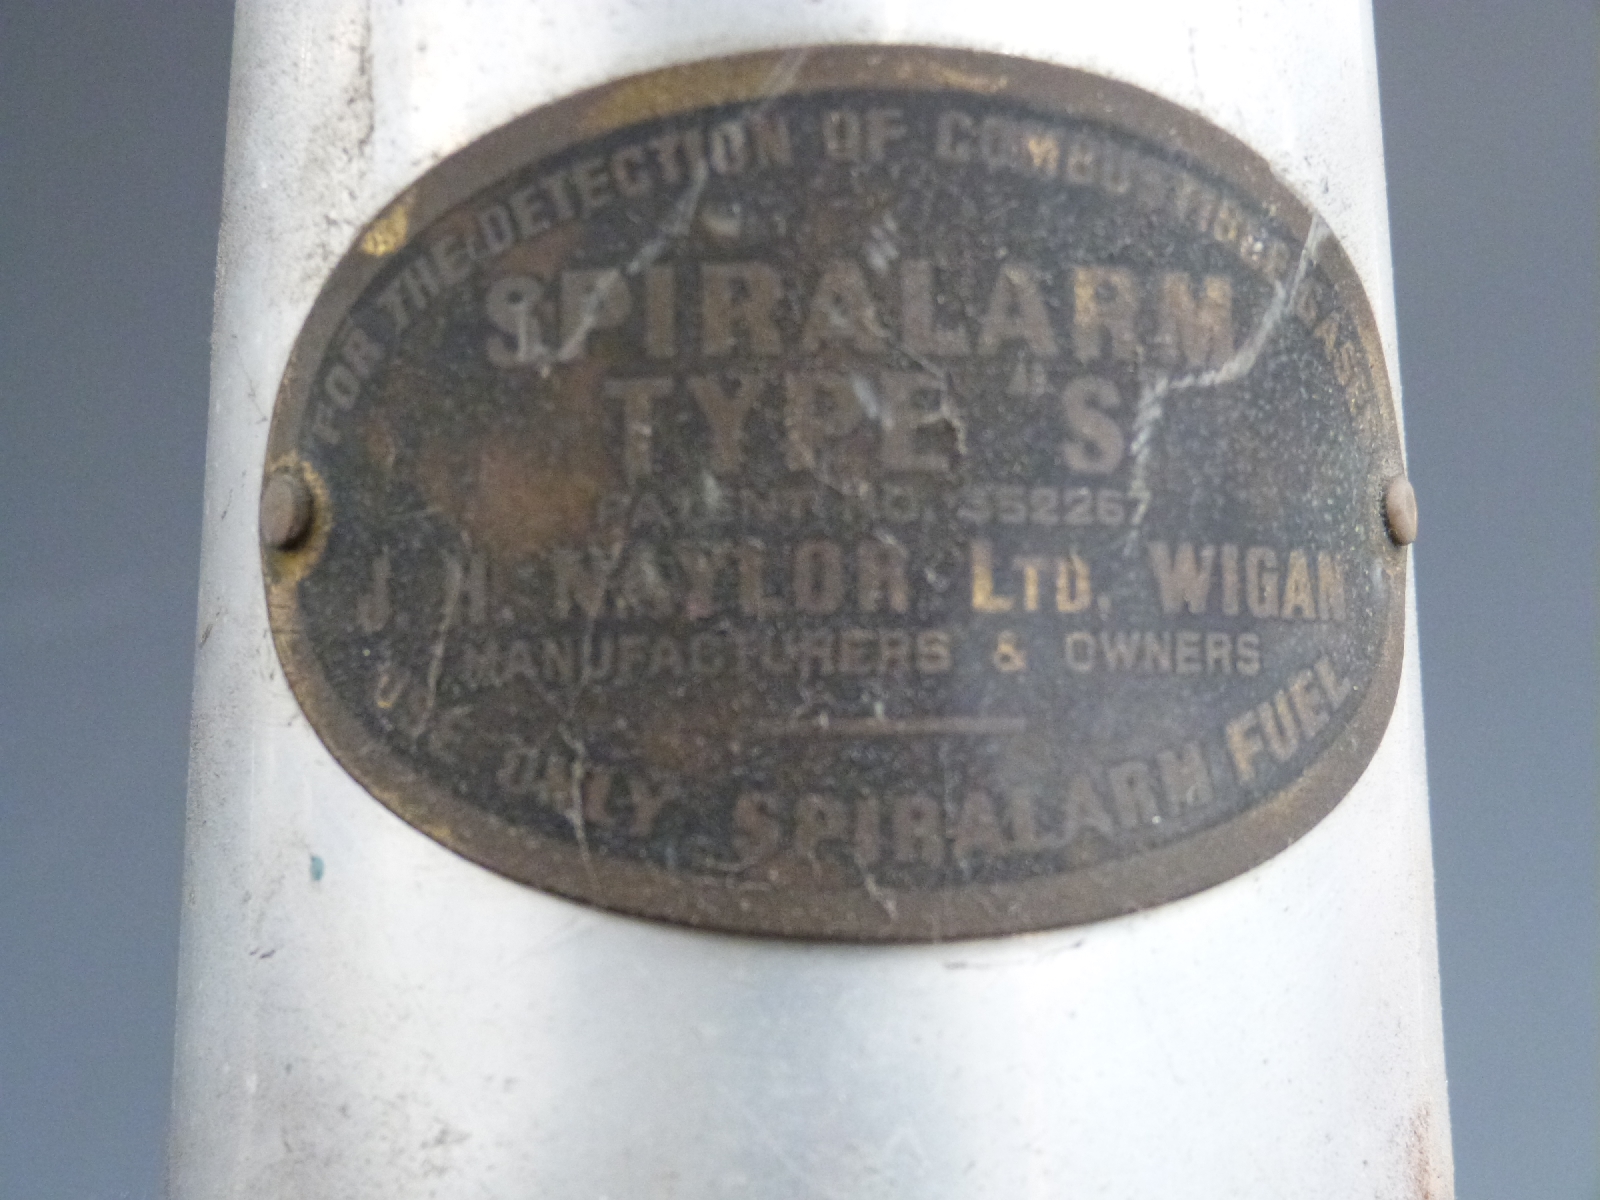 Six various miner's lamps including Spiralarm type S, Protector Lamp & Lighting Co Ltd, Baby Wolf - Image 3 of 3